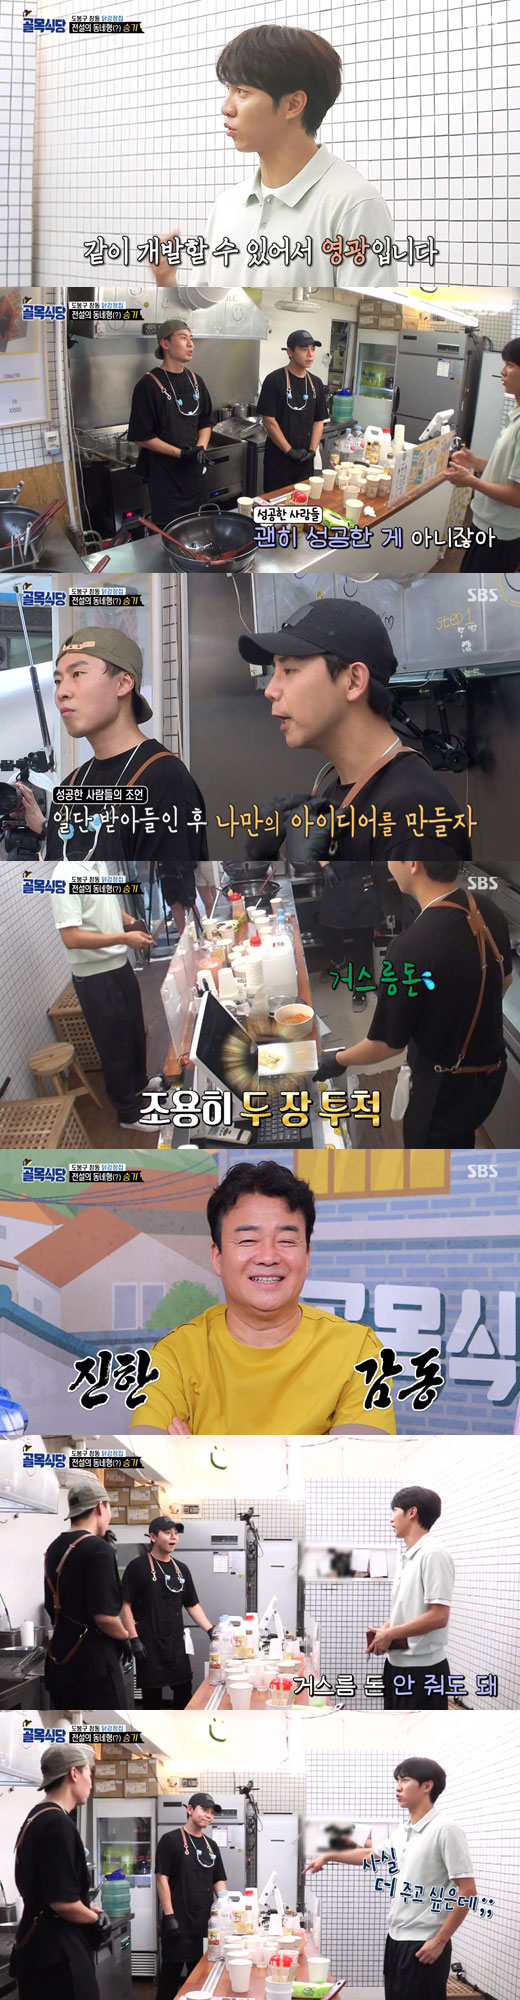 Singer and actor Lee Seung-gi looked cool with Cash calculations.In SBS Baek Jong-wons The Alley Restaurant broadcasted on the night of the 26th, Lee Seung-gi was inspecting Sweet and sour chicken house with the alley of Changdong alley in Dobong-gu.On this day, Lee Seung-gi sampled at Sweet and sour chicken house and told the bosses, It is an honor to develop together and to have the first tasting.I hope it will work, he said. I do not think Baek is a successful person. Once you accept it and continue, your own ideas come out.While leaving the store, Lee Seung-gi tried to make a calculation, and the boss said, I havent turned on the force yet.Lee Seung-gi said, I will do it in cash. At the same time, Lee surprised the MCs by saying, You do not have to give me change.When the bosses were embarrassed by too much, Lee Seung-gi said, Its ambiguous money. Actually, I want more, but its broadcast.